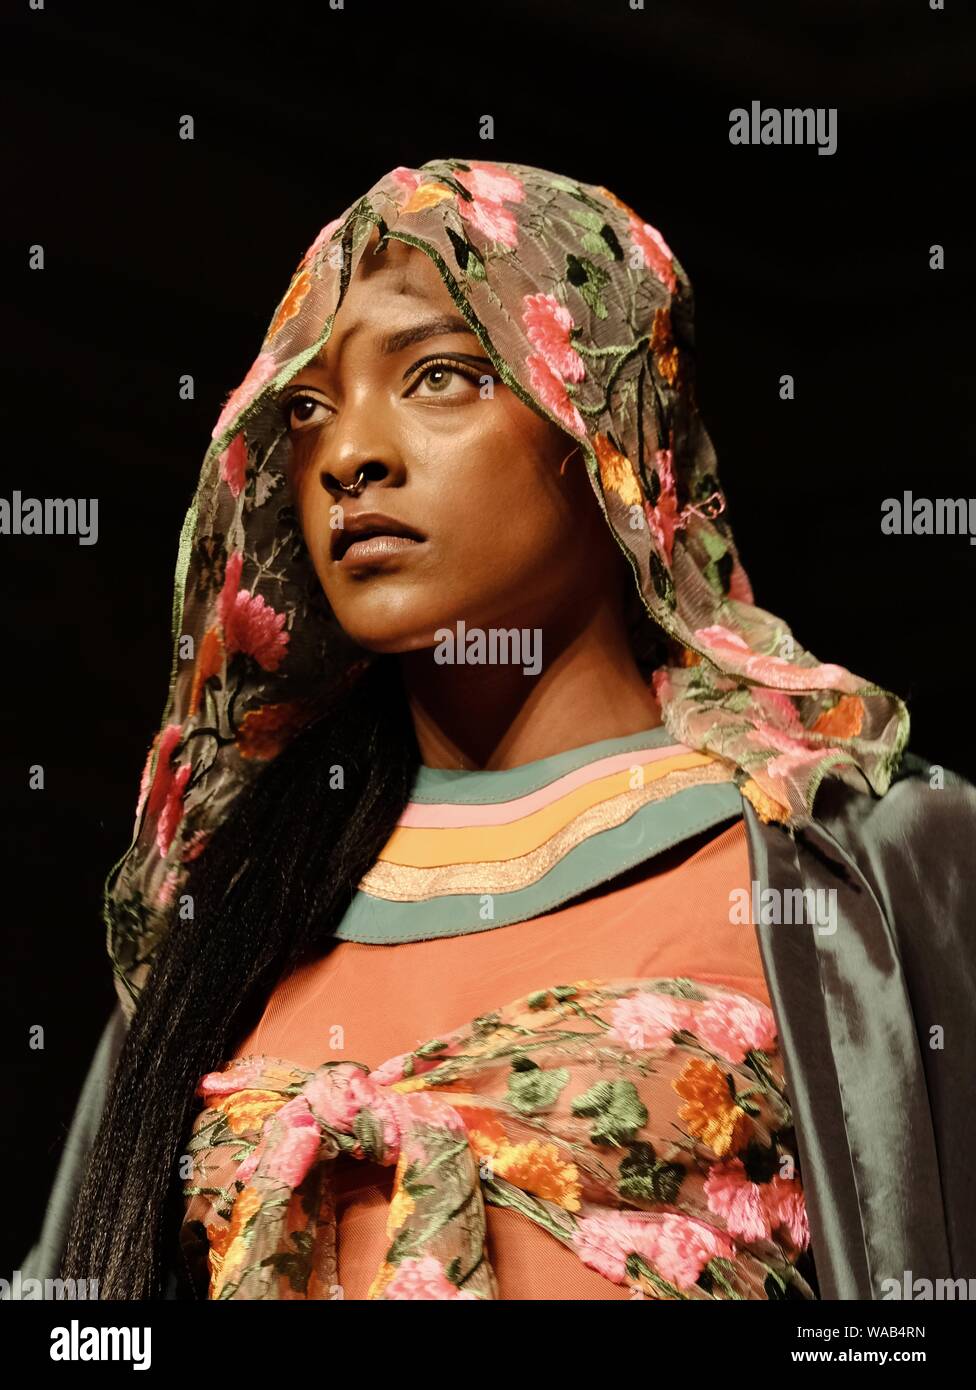 A model wearing a floral headscarf walks for designer Muhire during Africa Fashion Week in London. Stock Photo